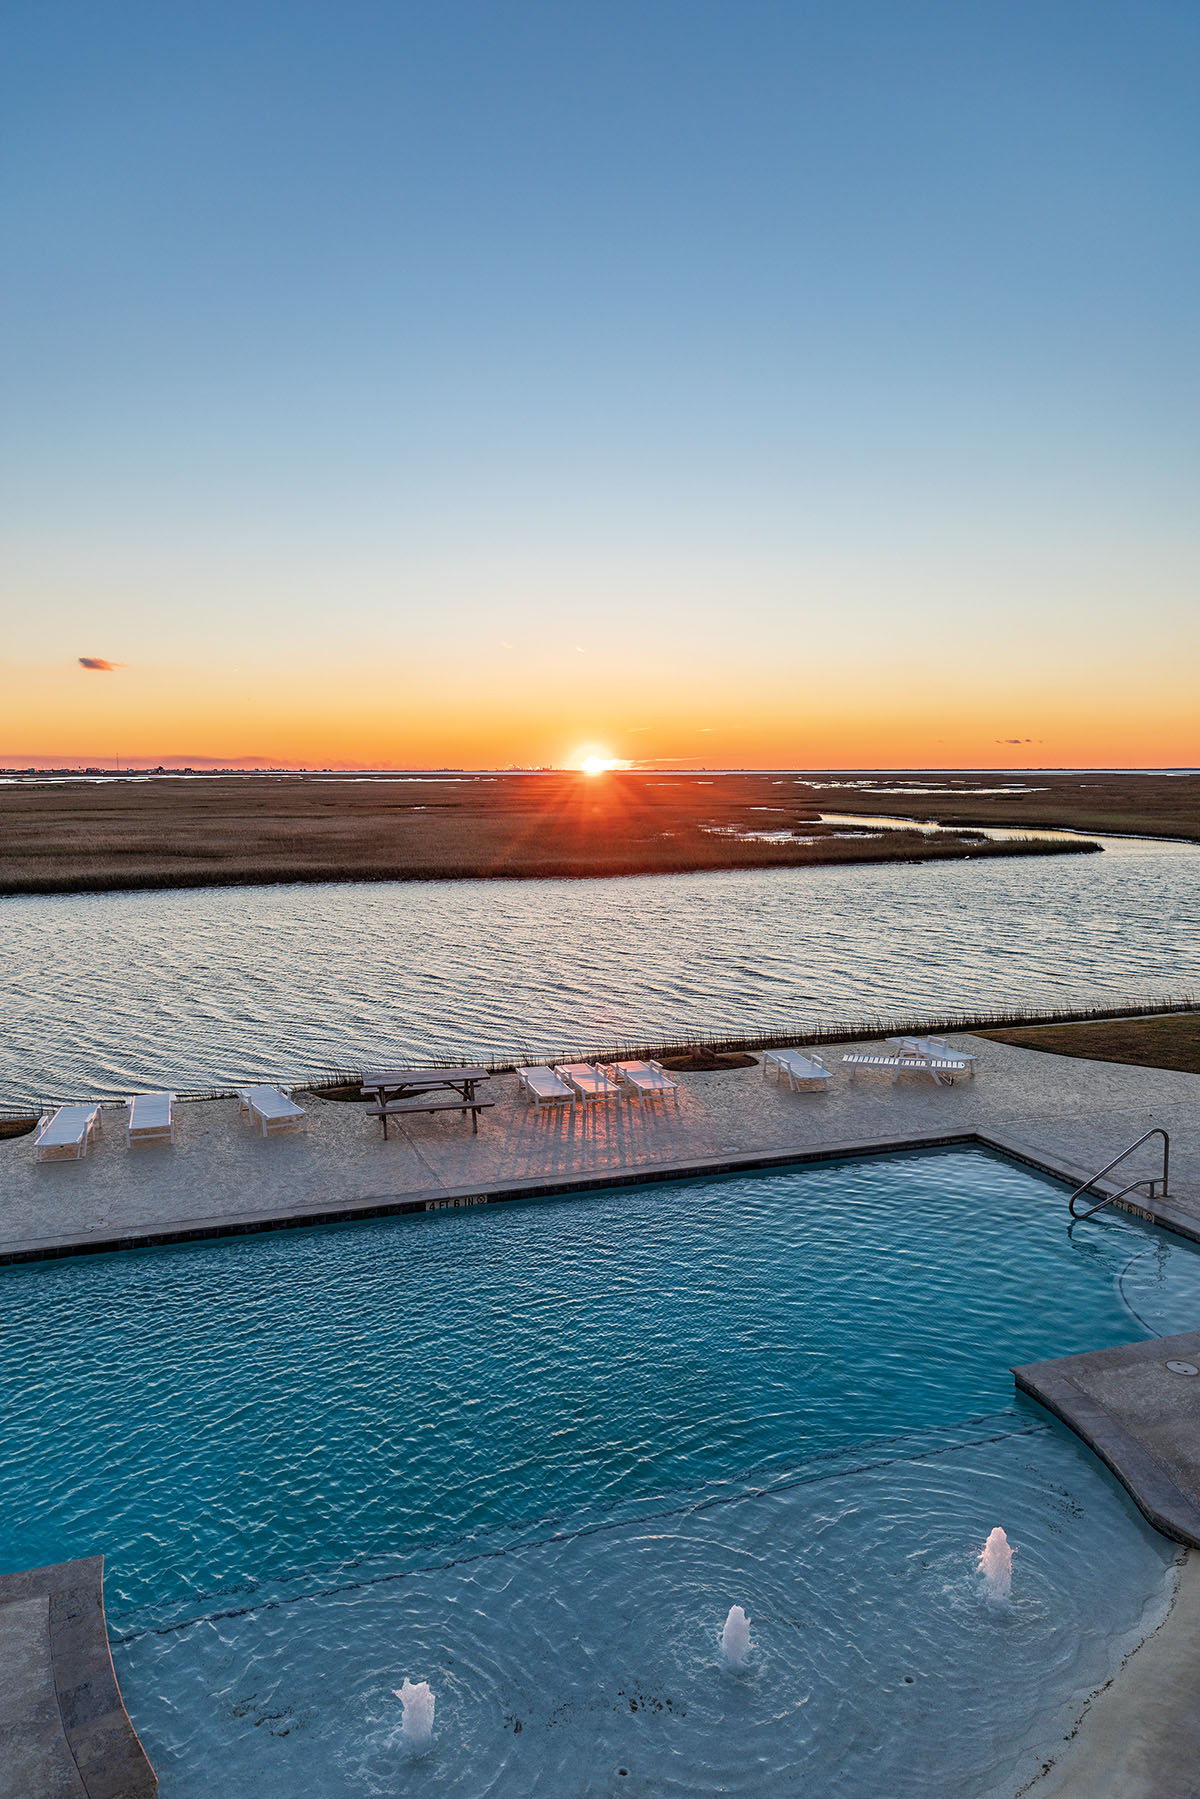 The sun sets behind a clear blue pool 